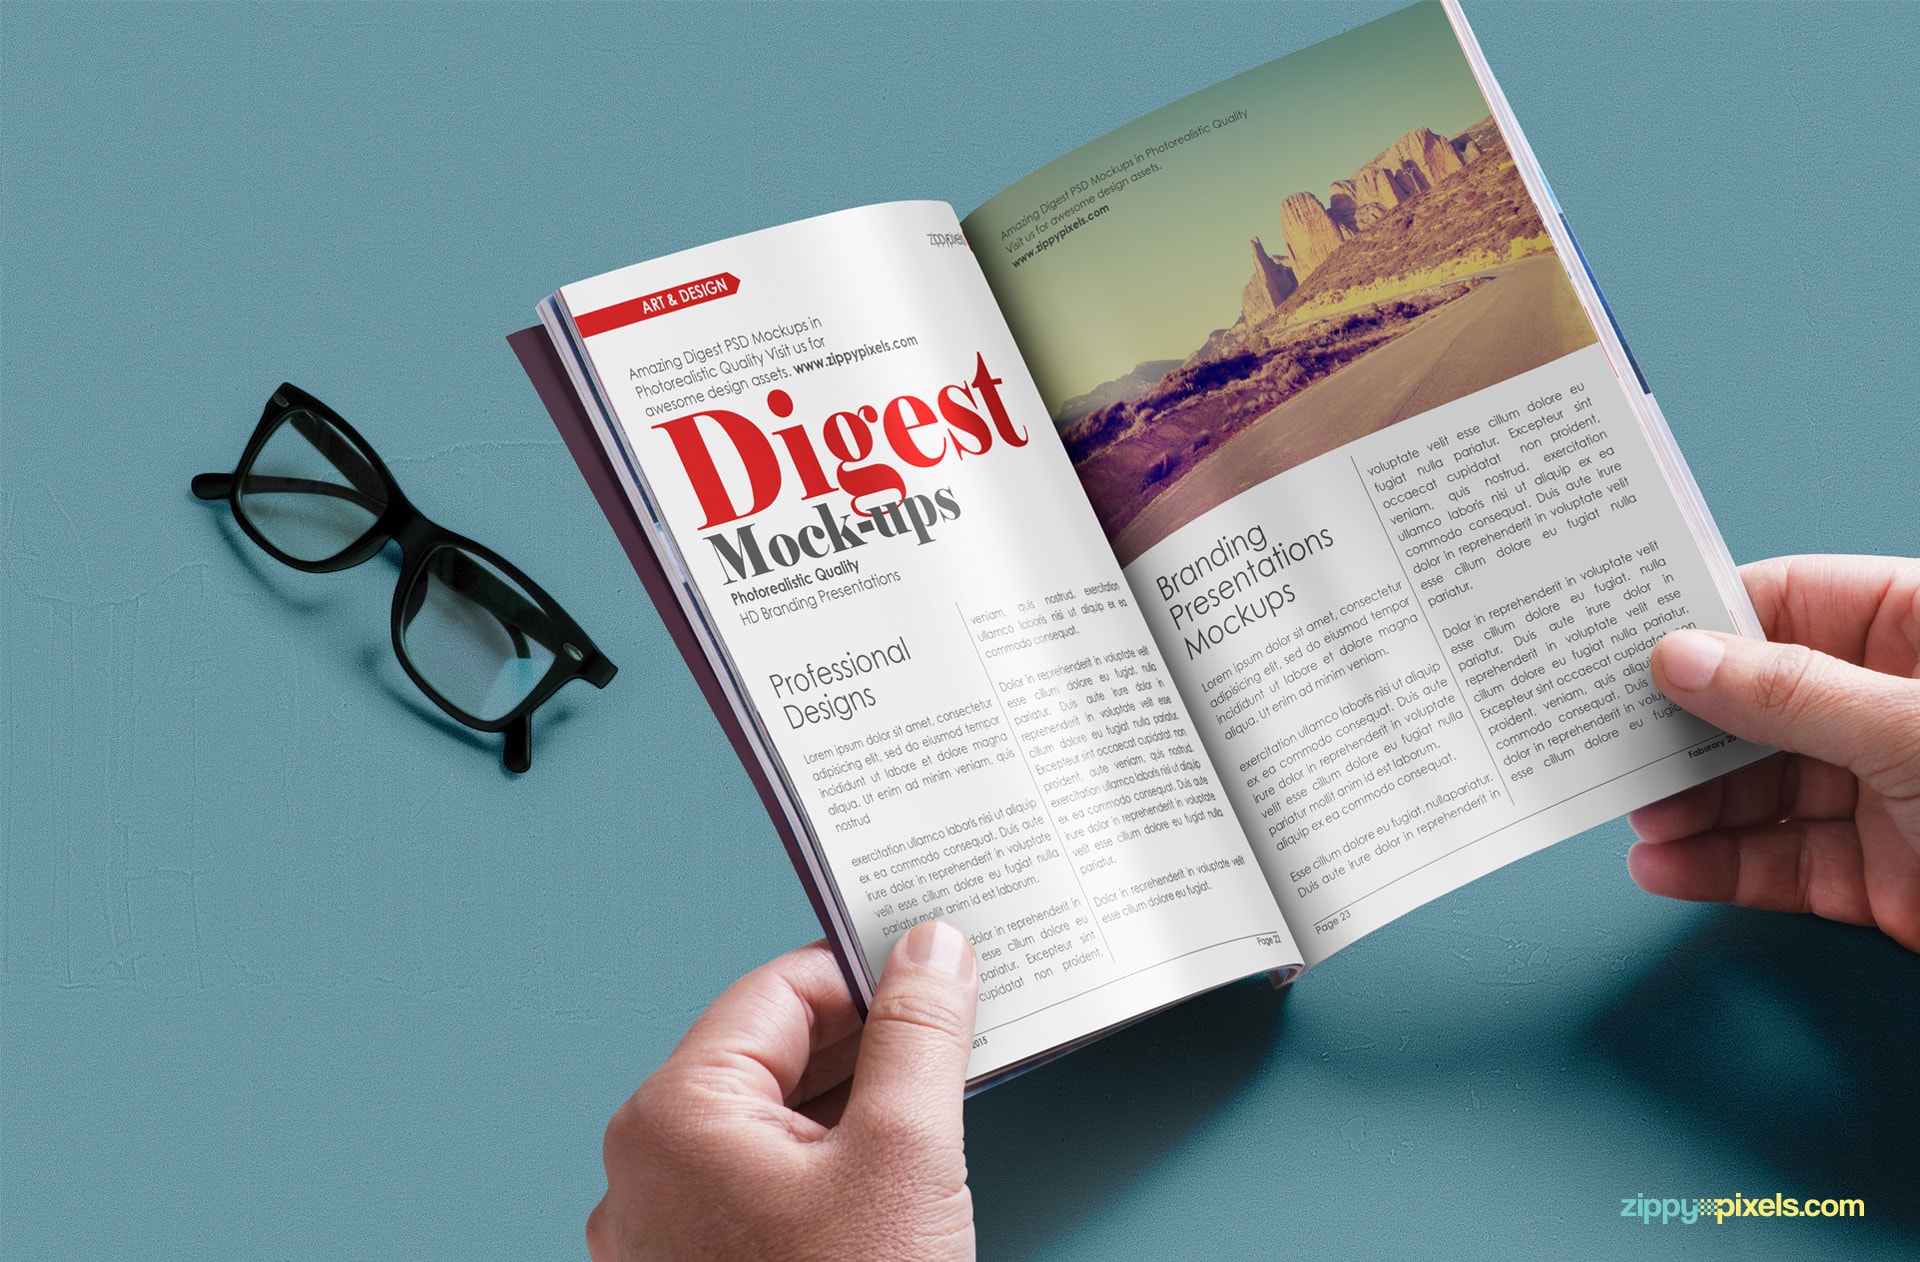 Free photorealistic paperback digest mockup for showcasing ad or page designs